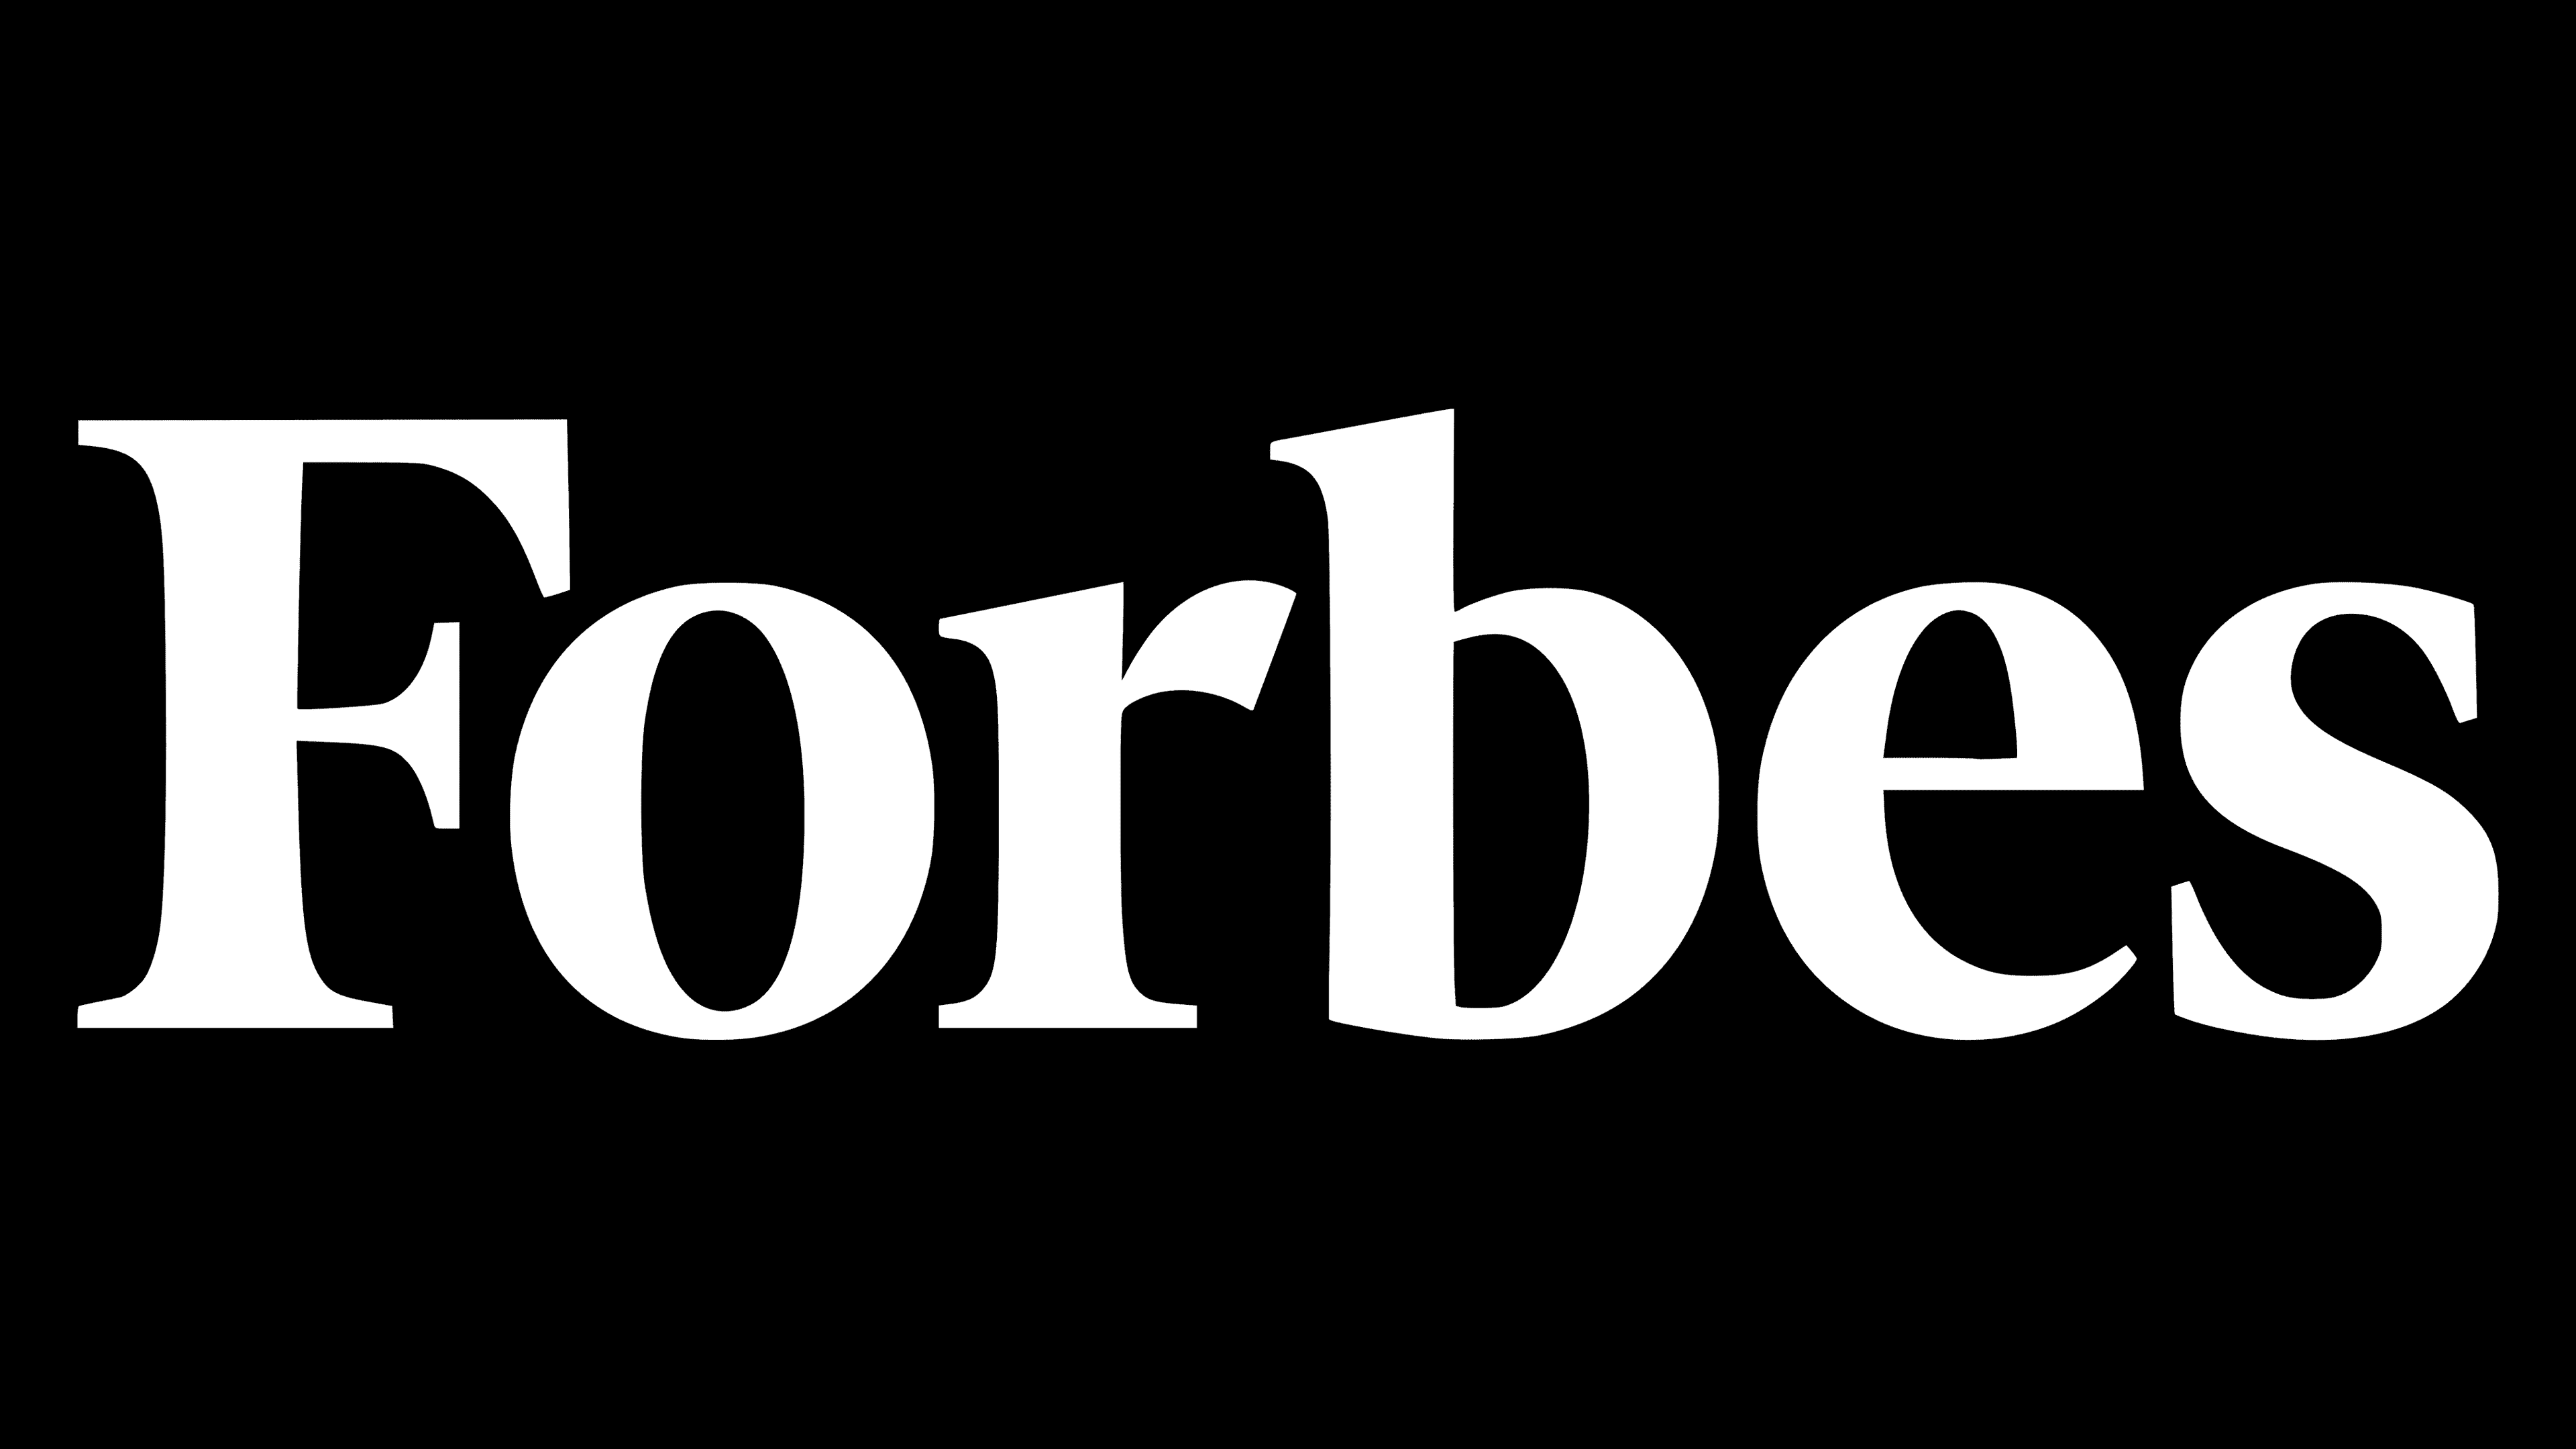 Forbes – Using The Power Of Open Source To Drive Network Automation